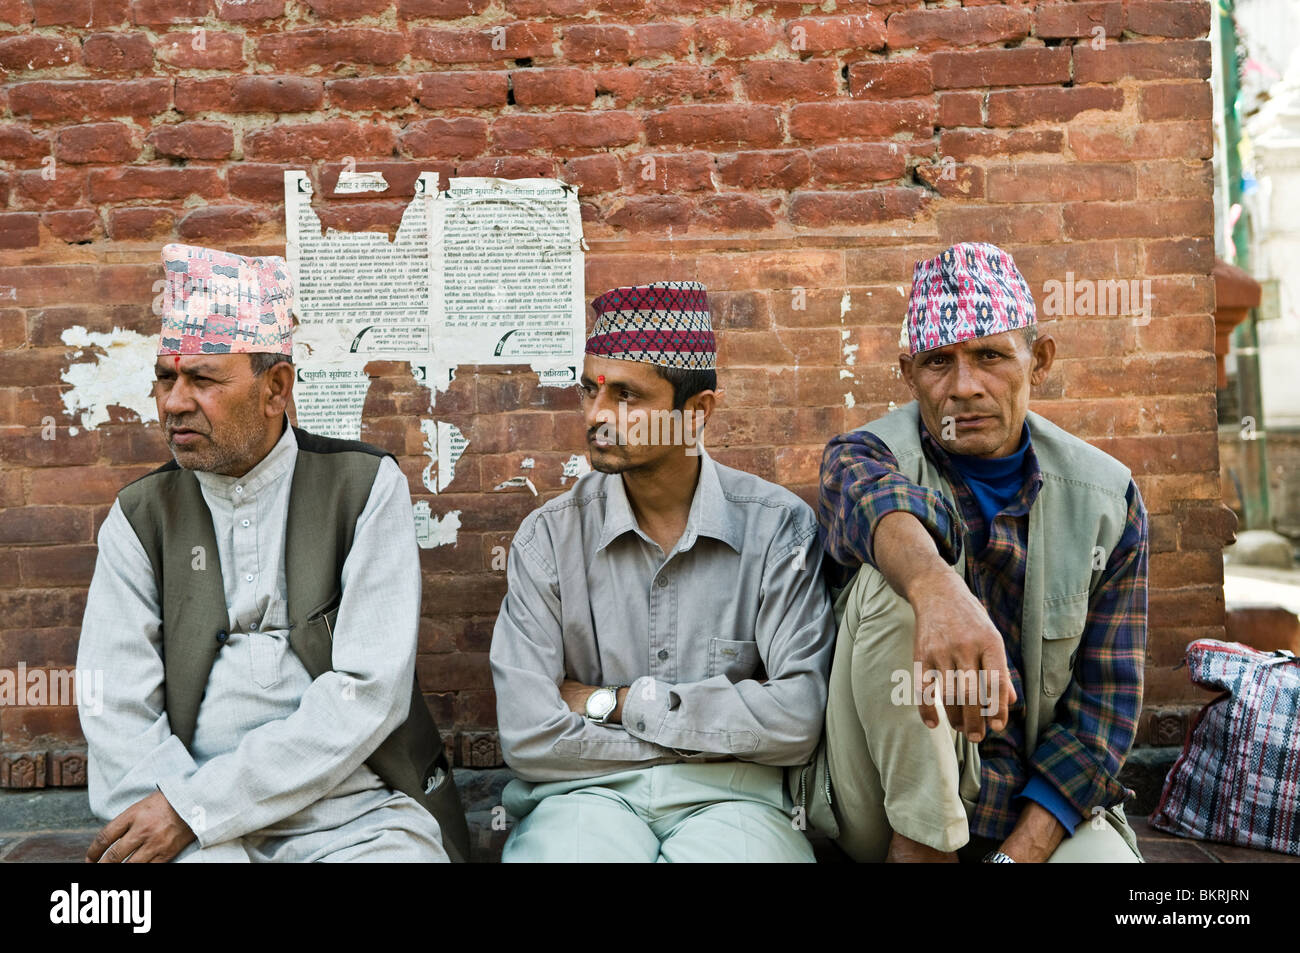 Sitting and watching people as life goes by. Nepali men wearing traditional Nepali hats. Stock Photo